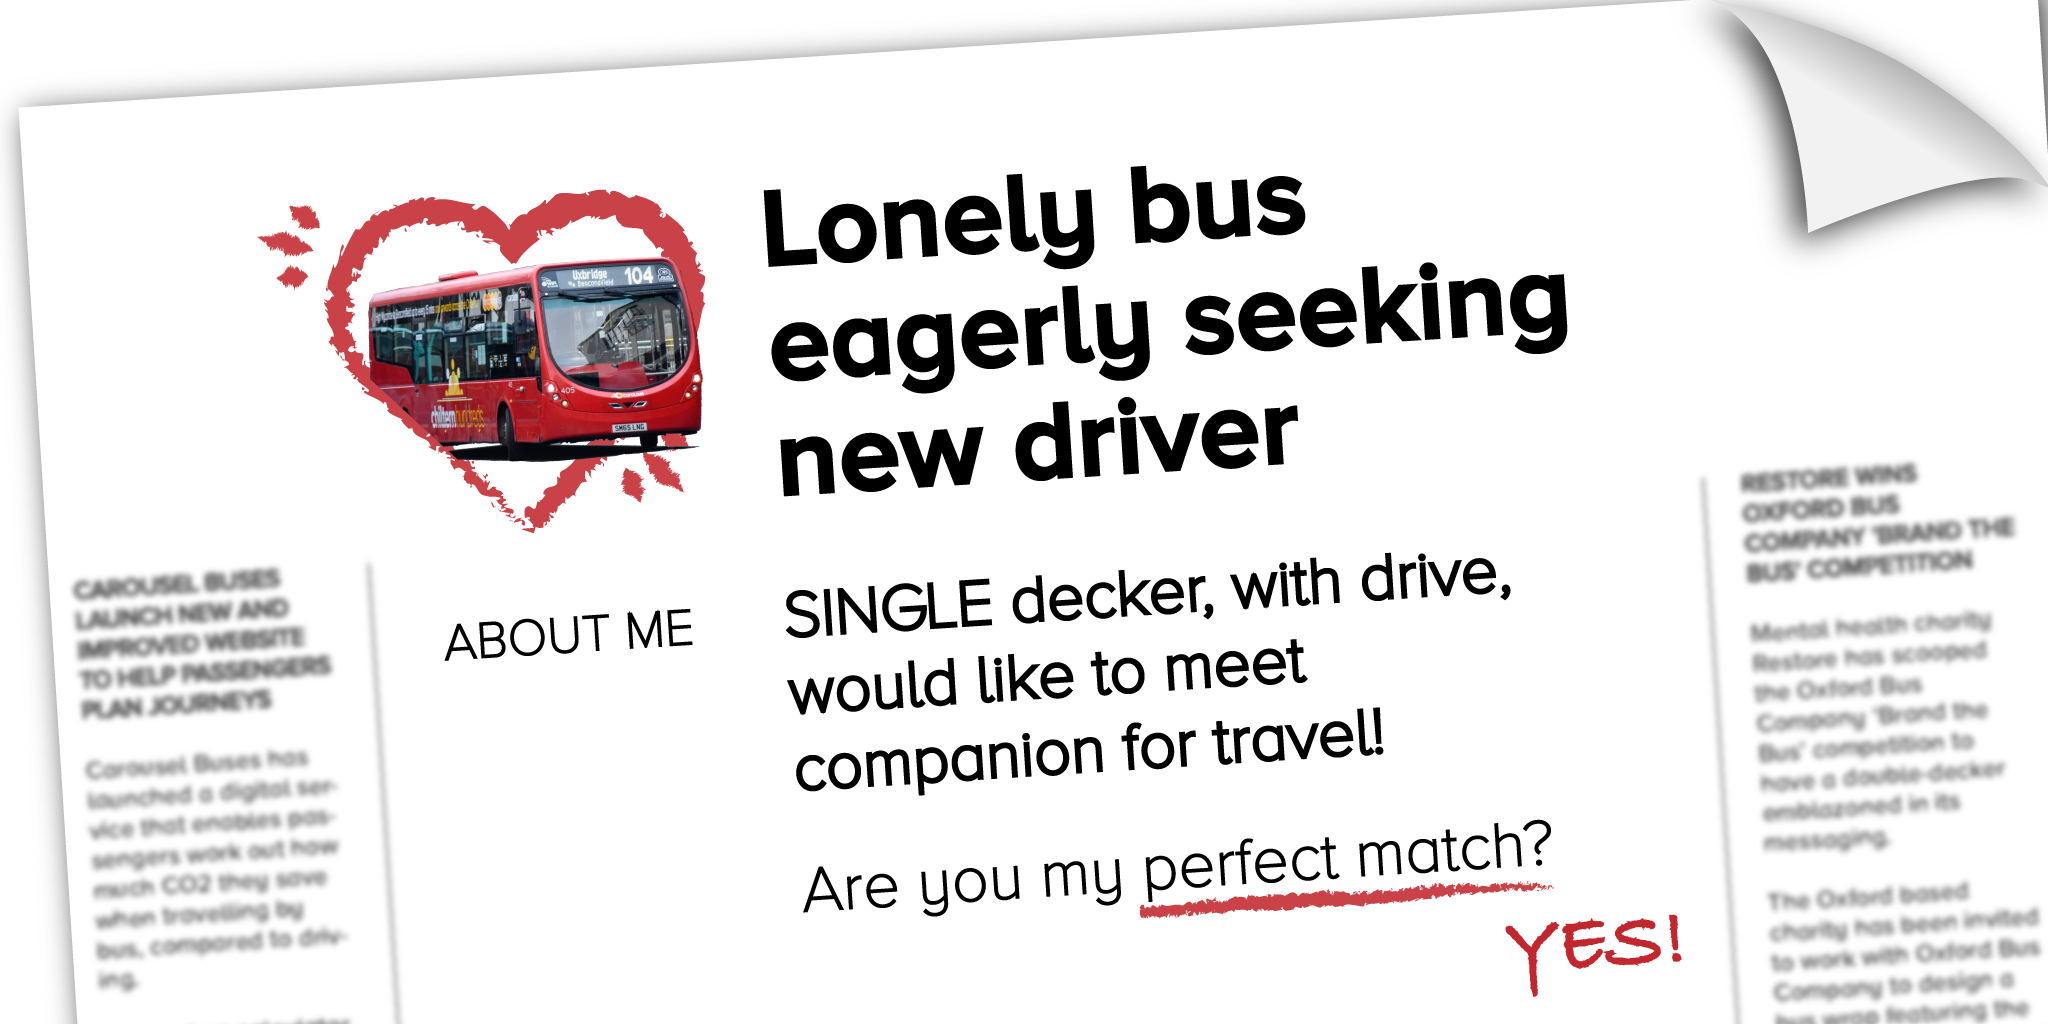 SINGLE decker, with drive, would like to meet companion for travel.